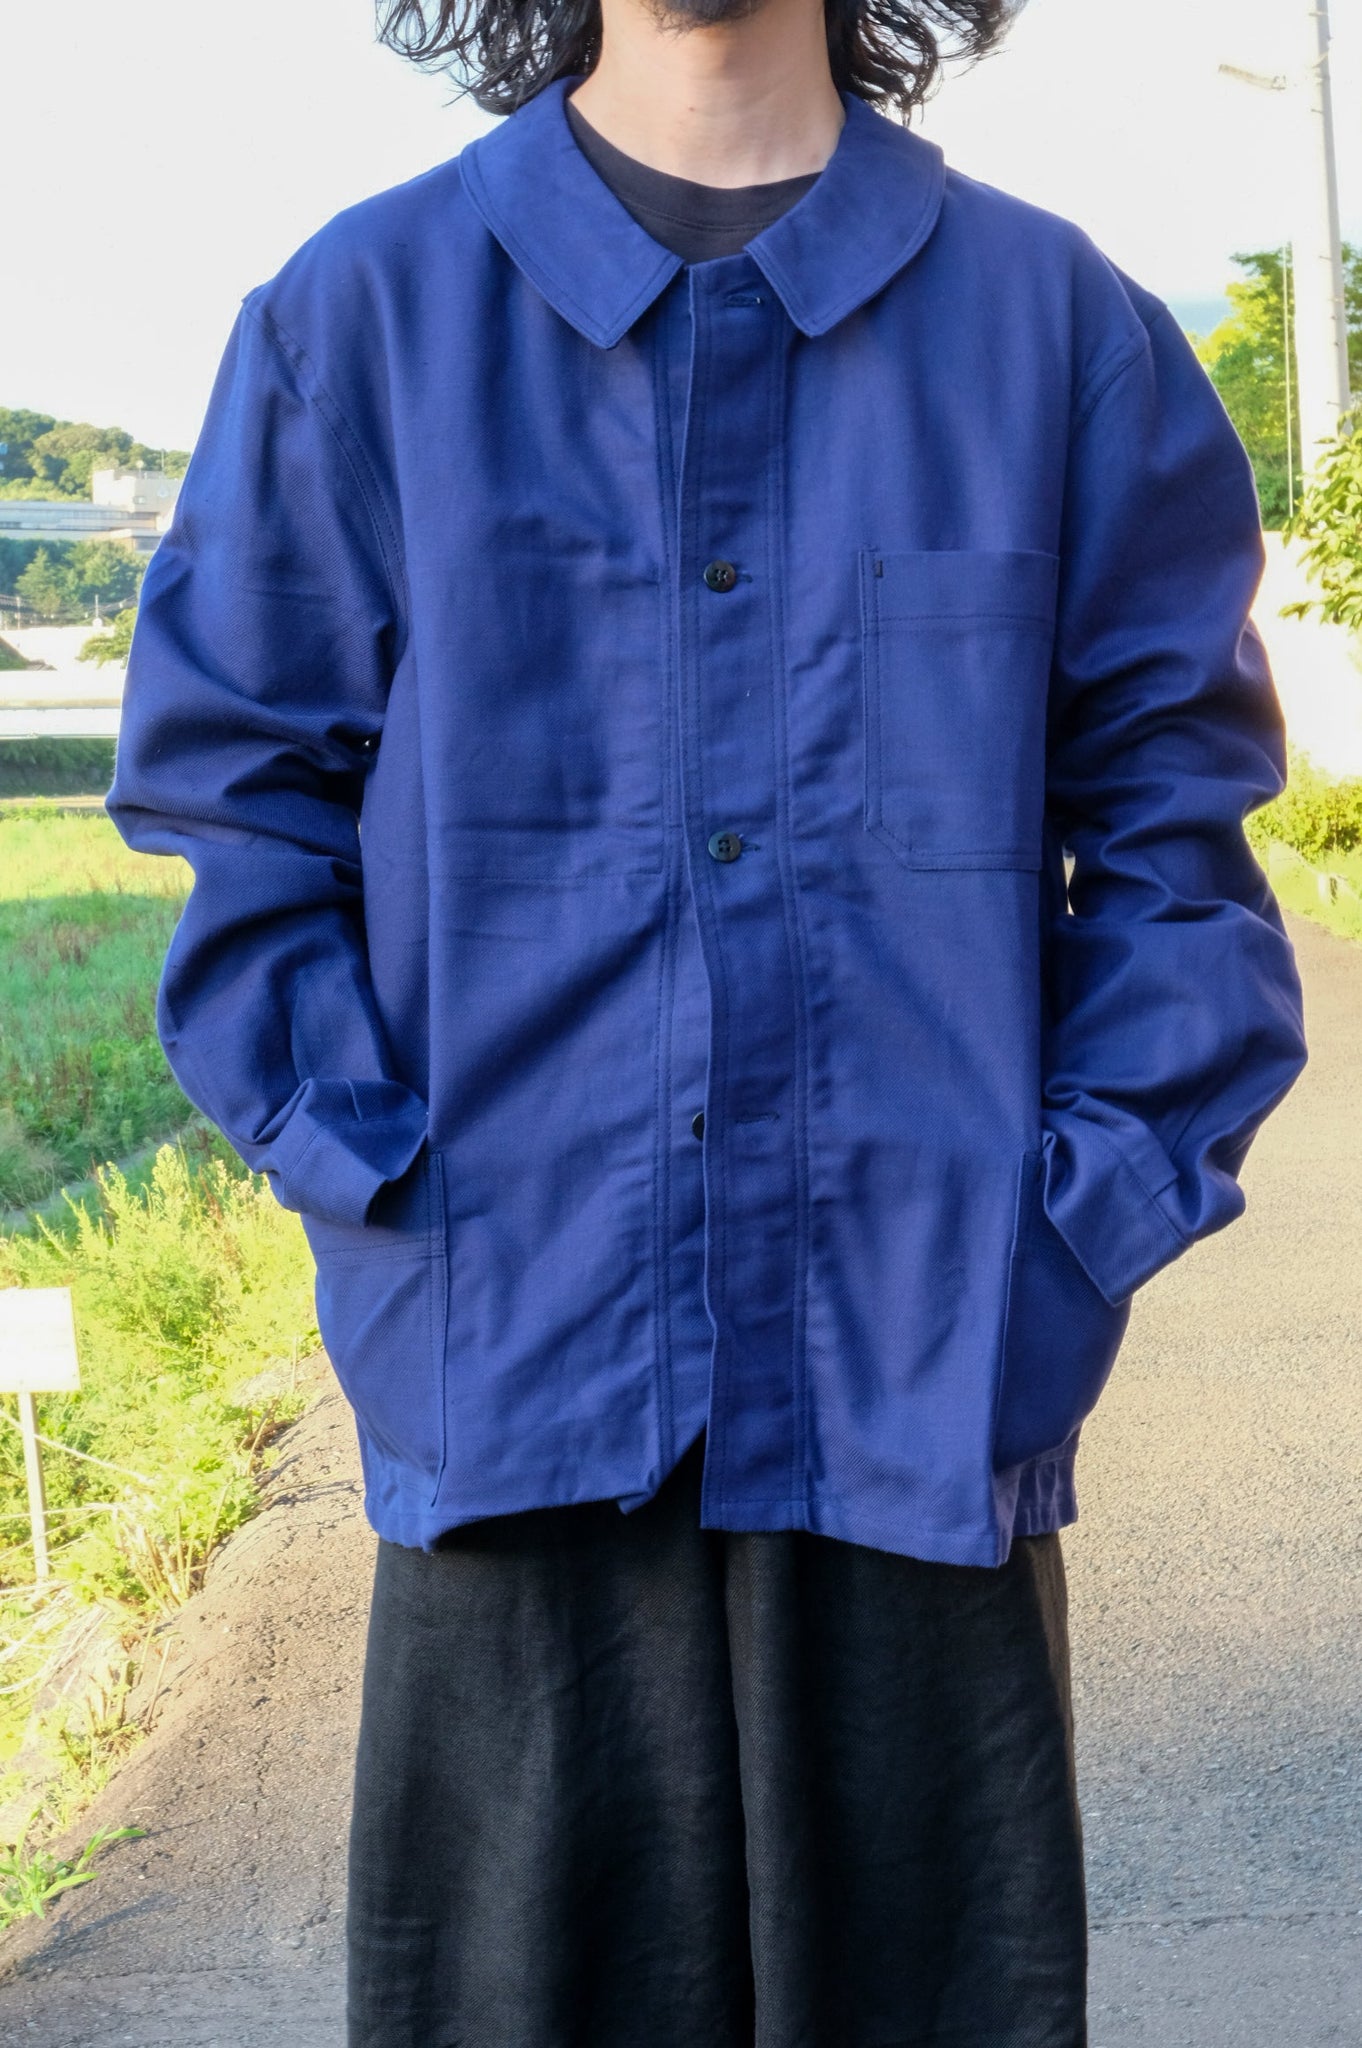 DEAD STOCK "1940's ~ FRENCH WORK JACKET"